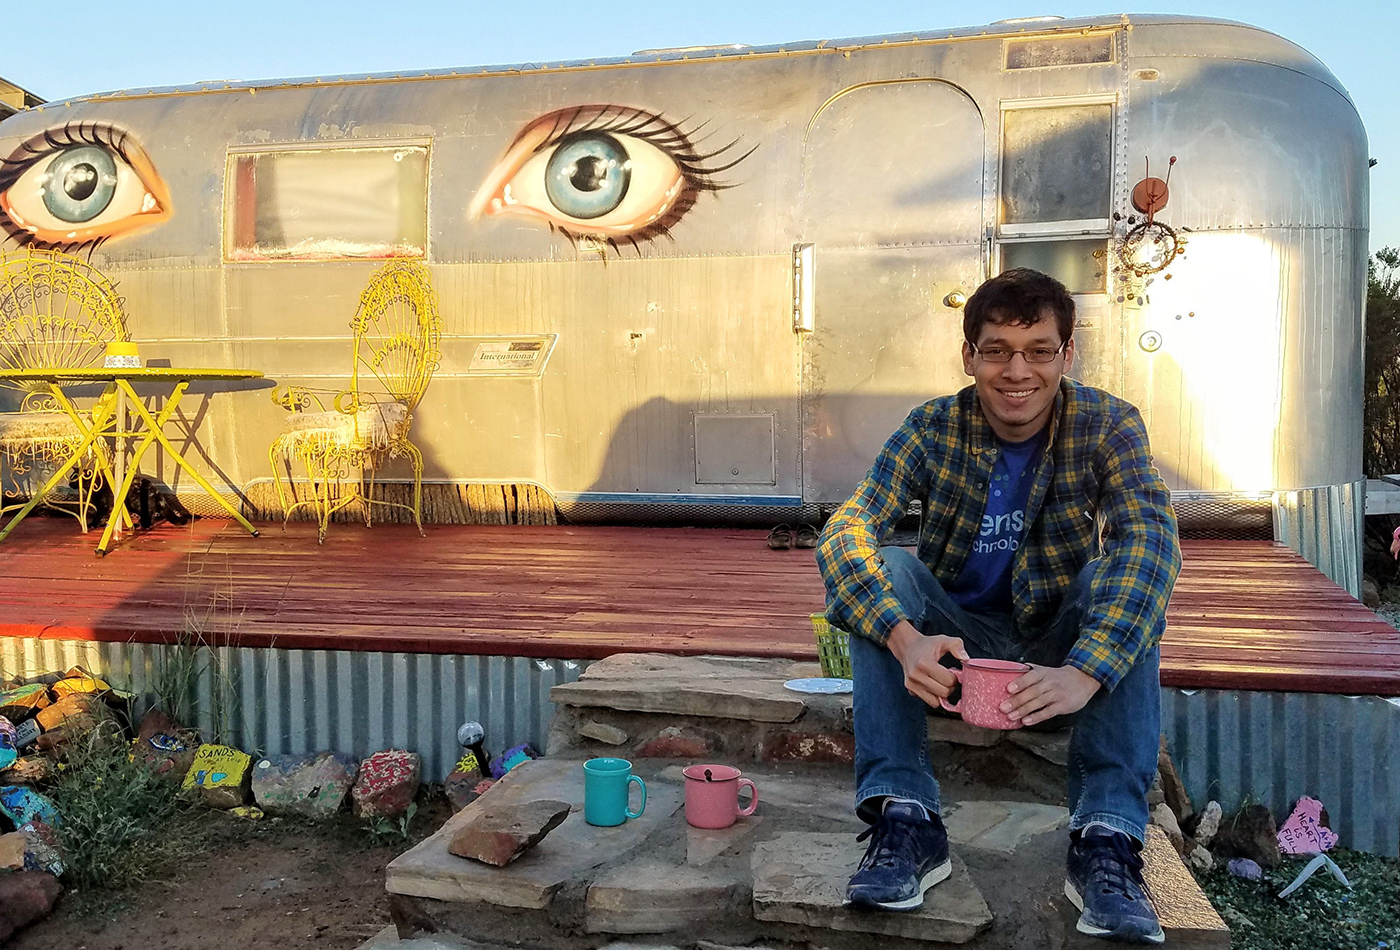 A male graduate student sits in front of an airstream trailer painted with two blue eyes.